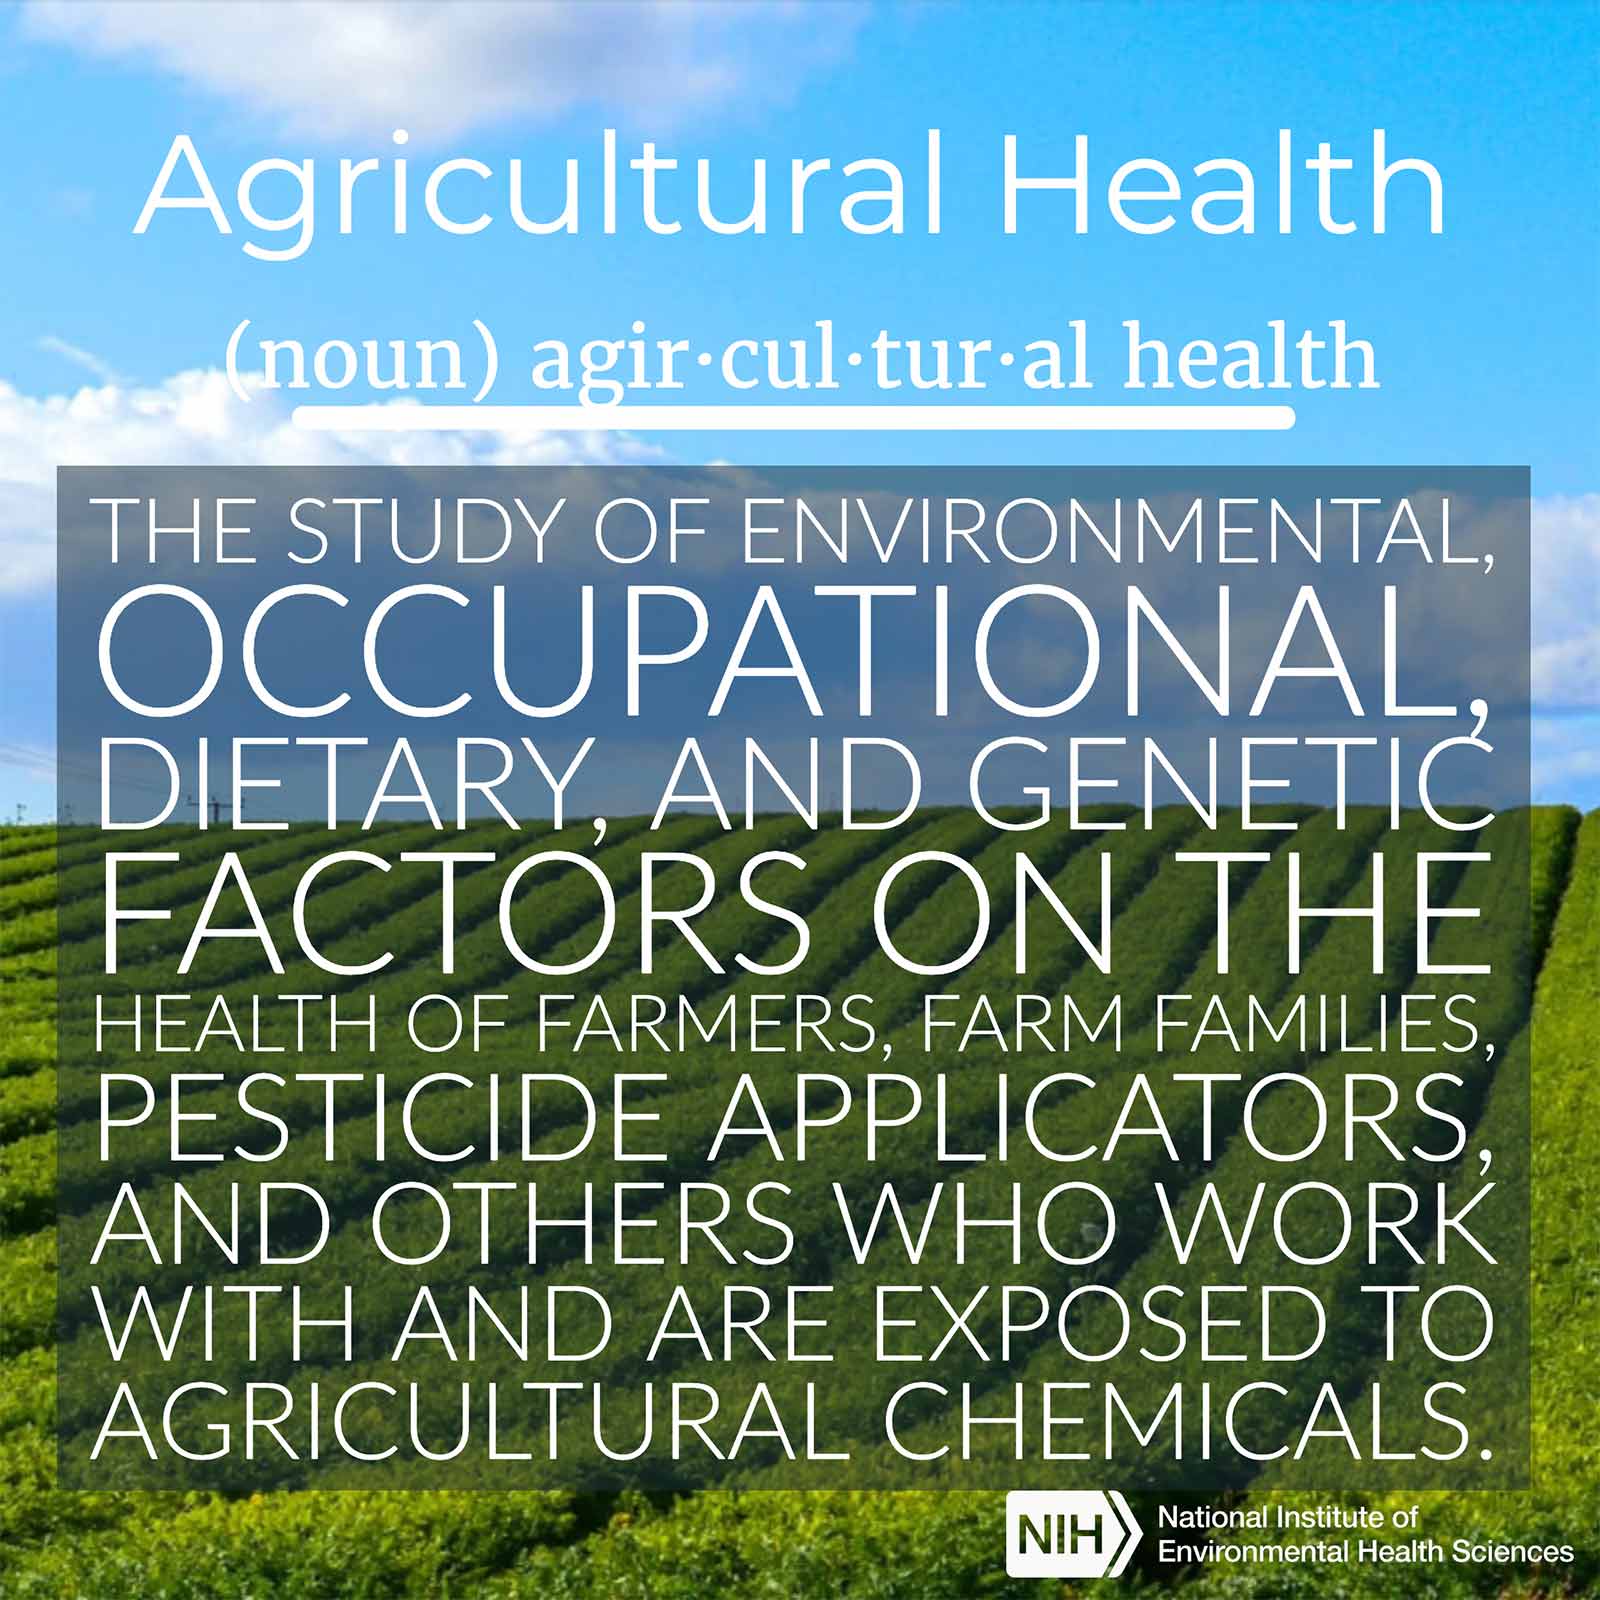 Agricultural Health (noun) defined as "the study of environmental, occupational, dietary, and genetic factors on the health of farmers, farm families, pesticide applicators, and others who work with and are exposed to agricultural chemicals."